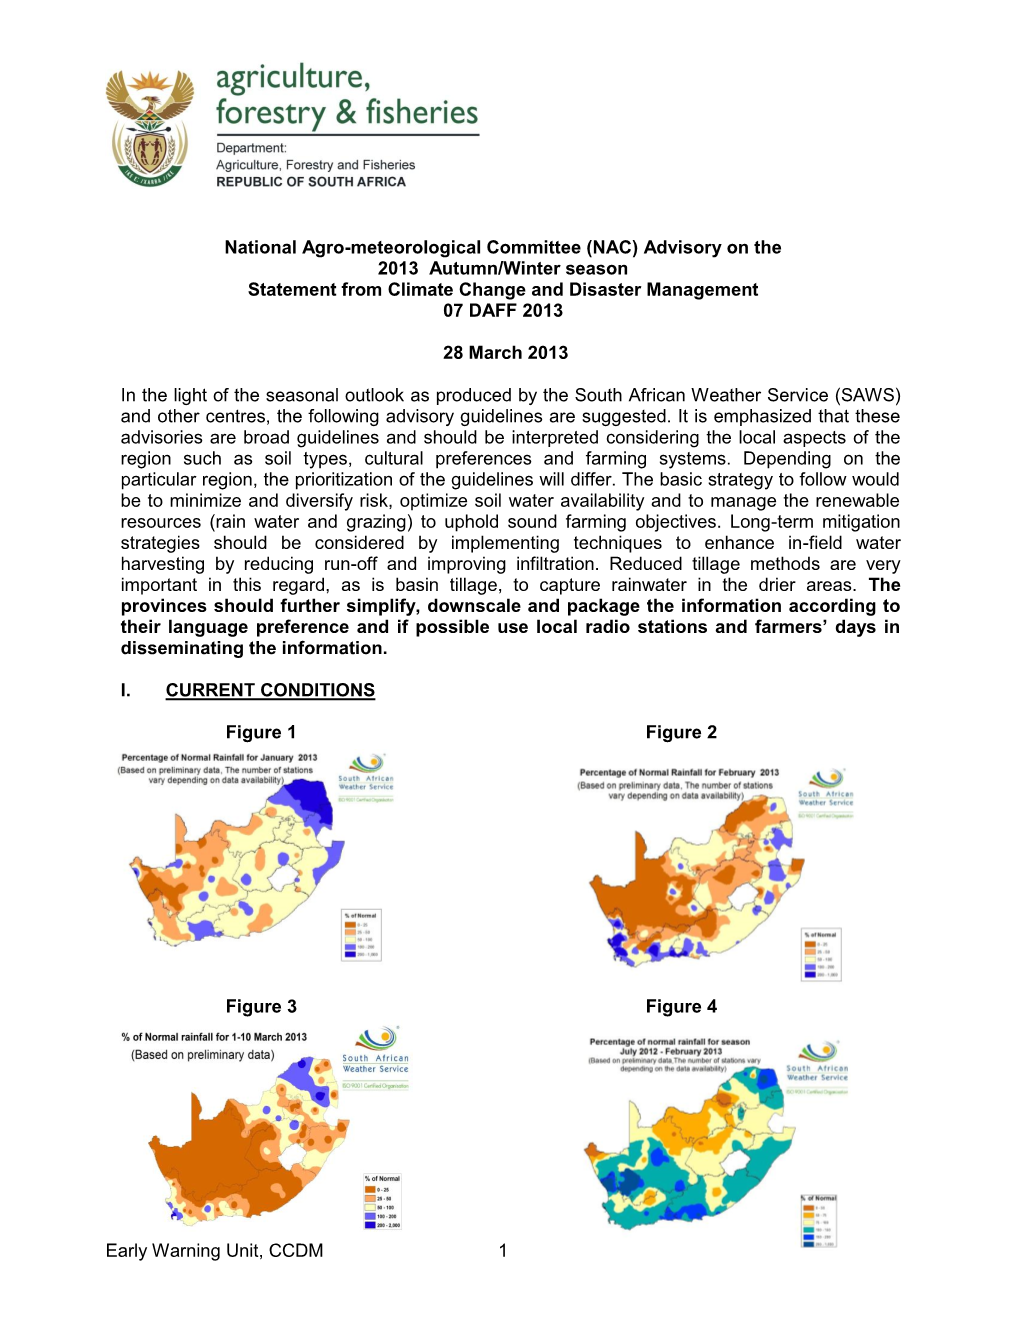 February 2013, Except for North West, Northern Free State and North-Eastern Parts of the Northern Cape Where It Was Below Normal (Figure 4)